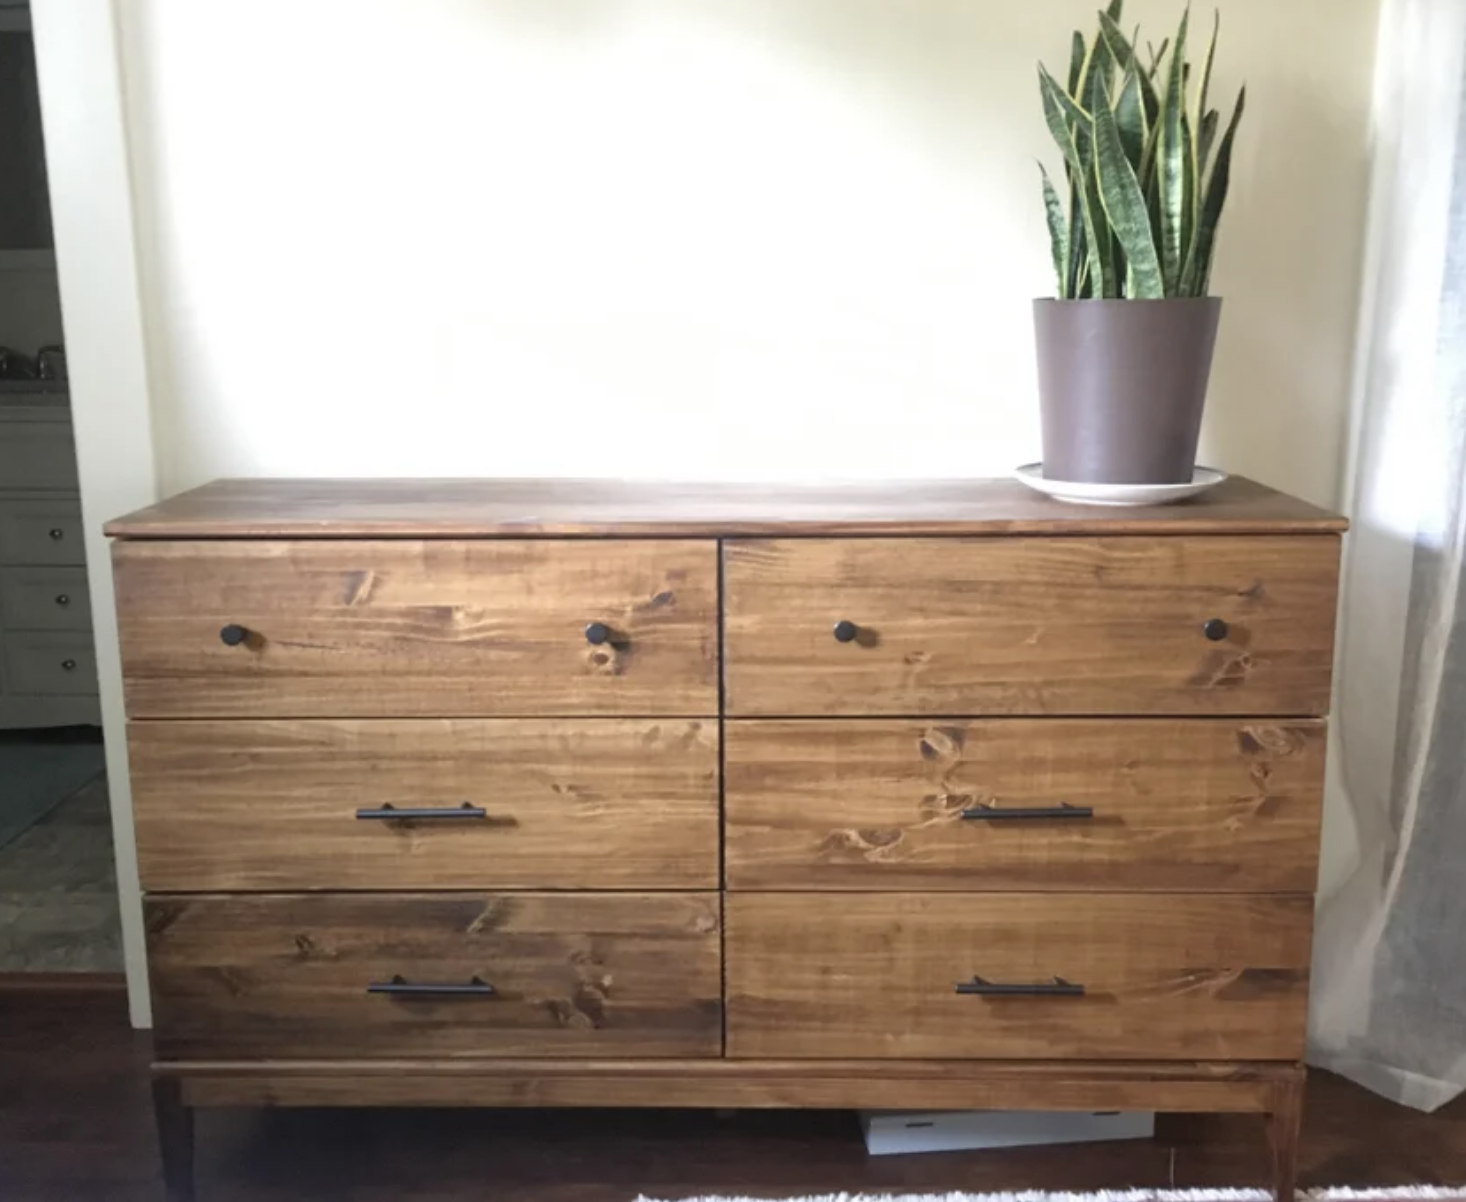 People Shared Their Best Ikea Furniture Hacks And They Look Incredible